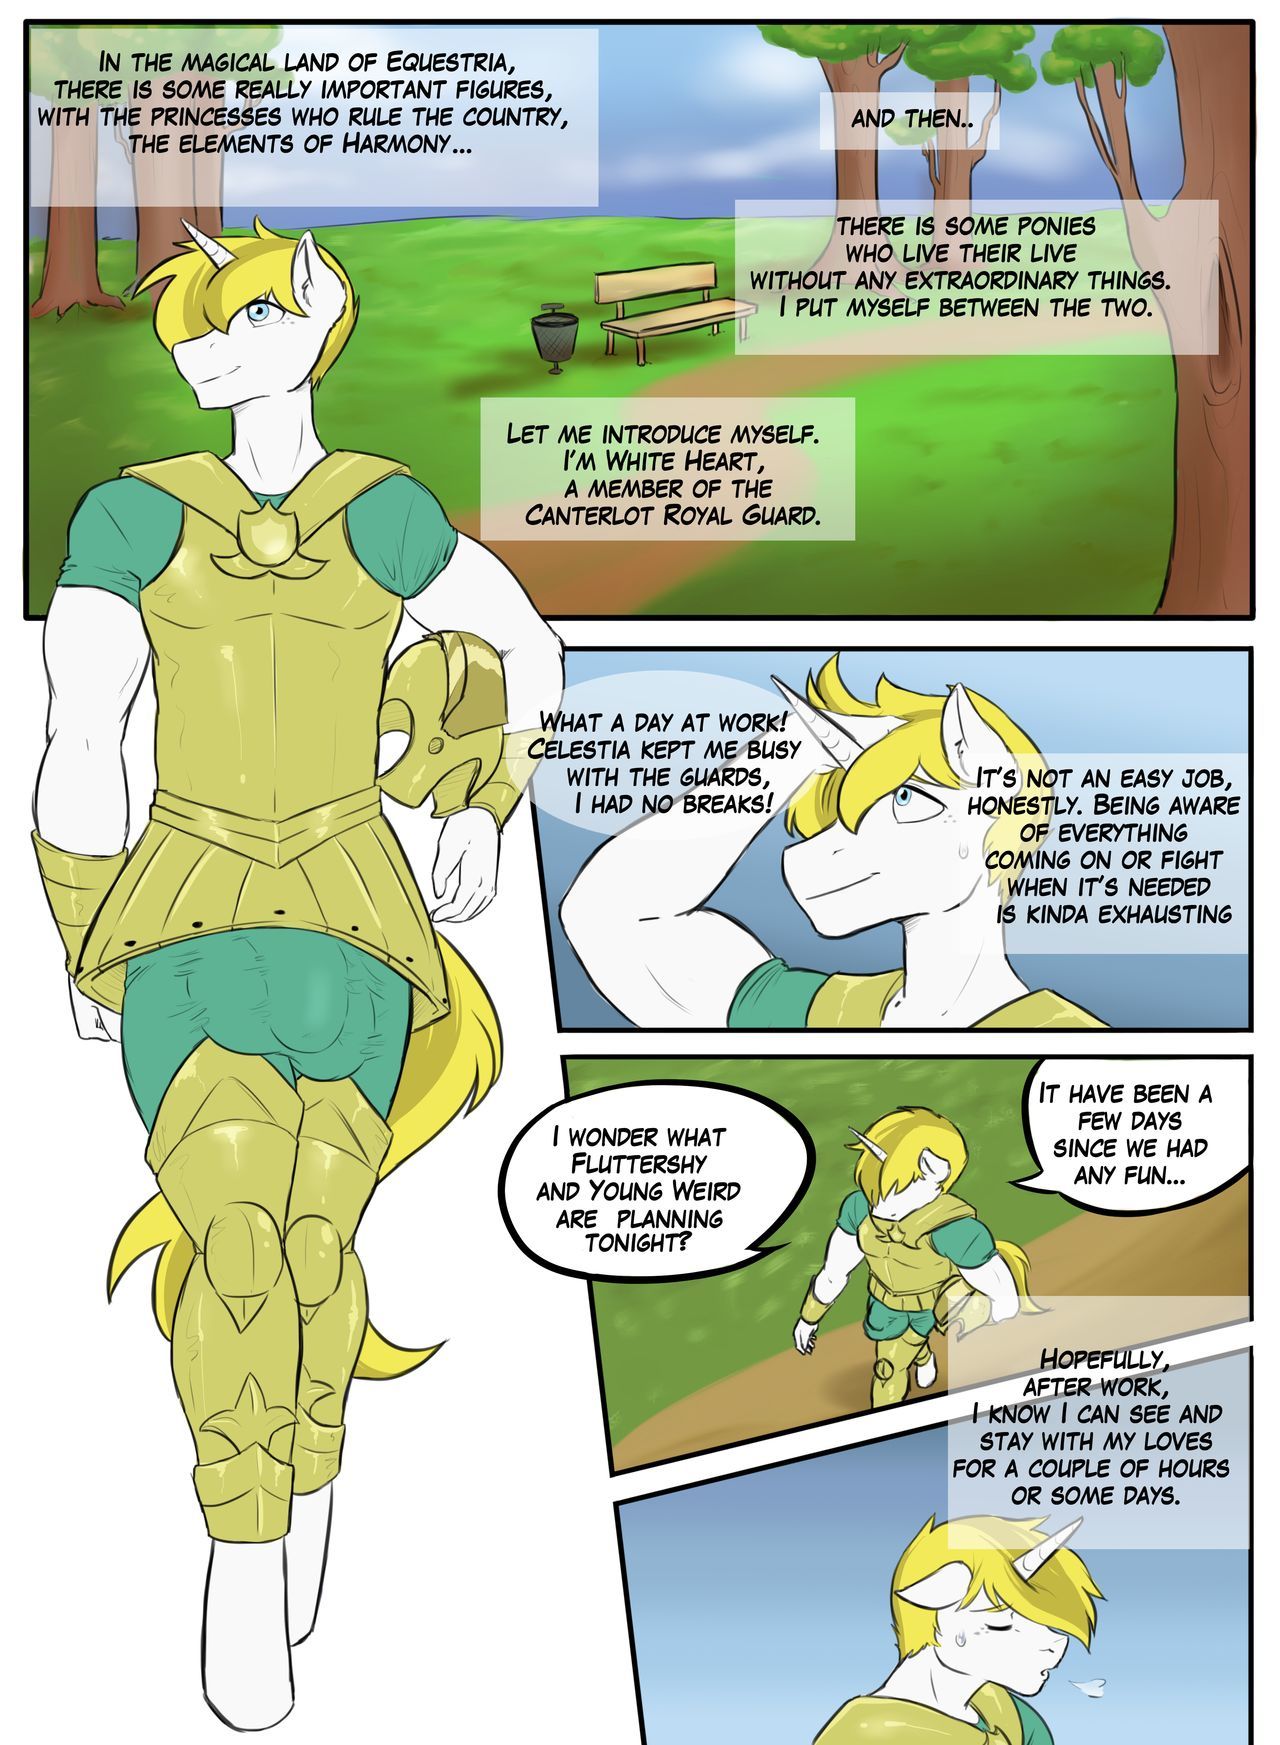 Heart of Gold (My Little Pony Friendship Is Magic) page 2